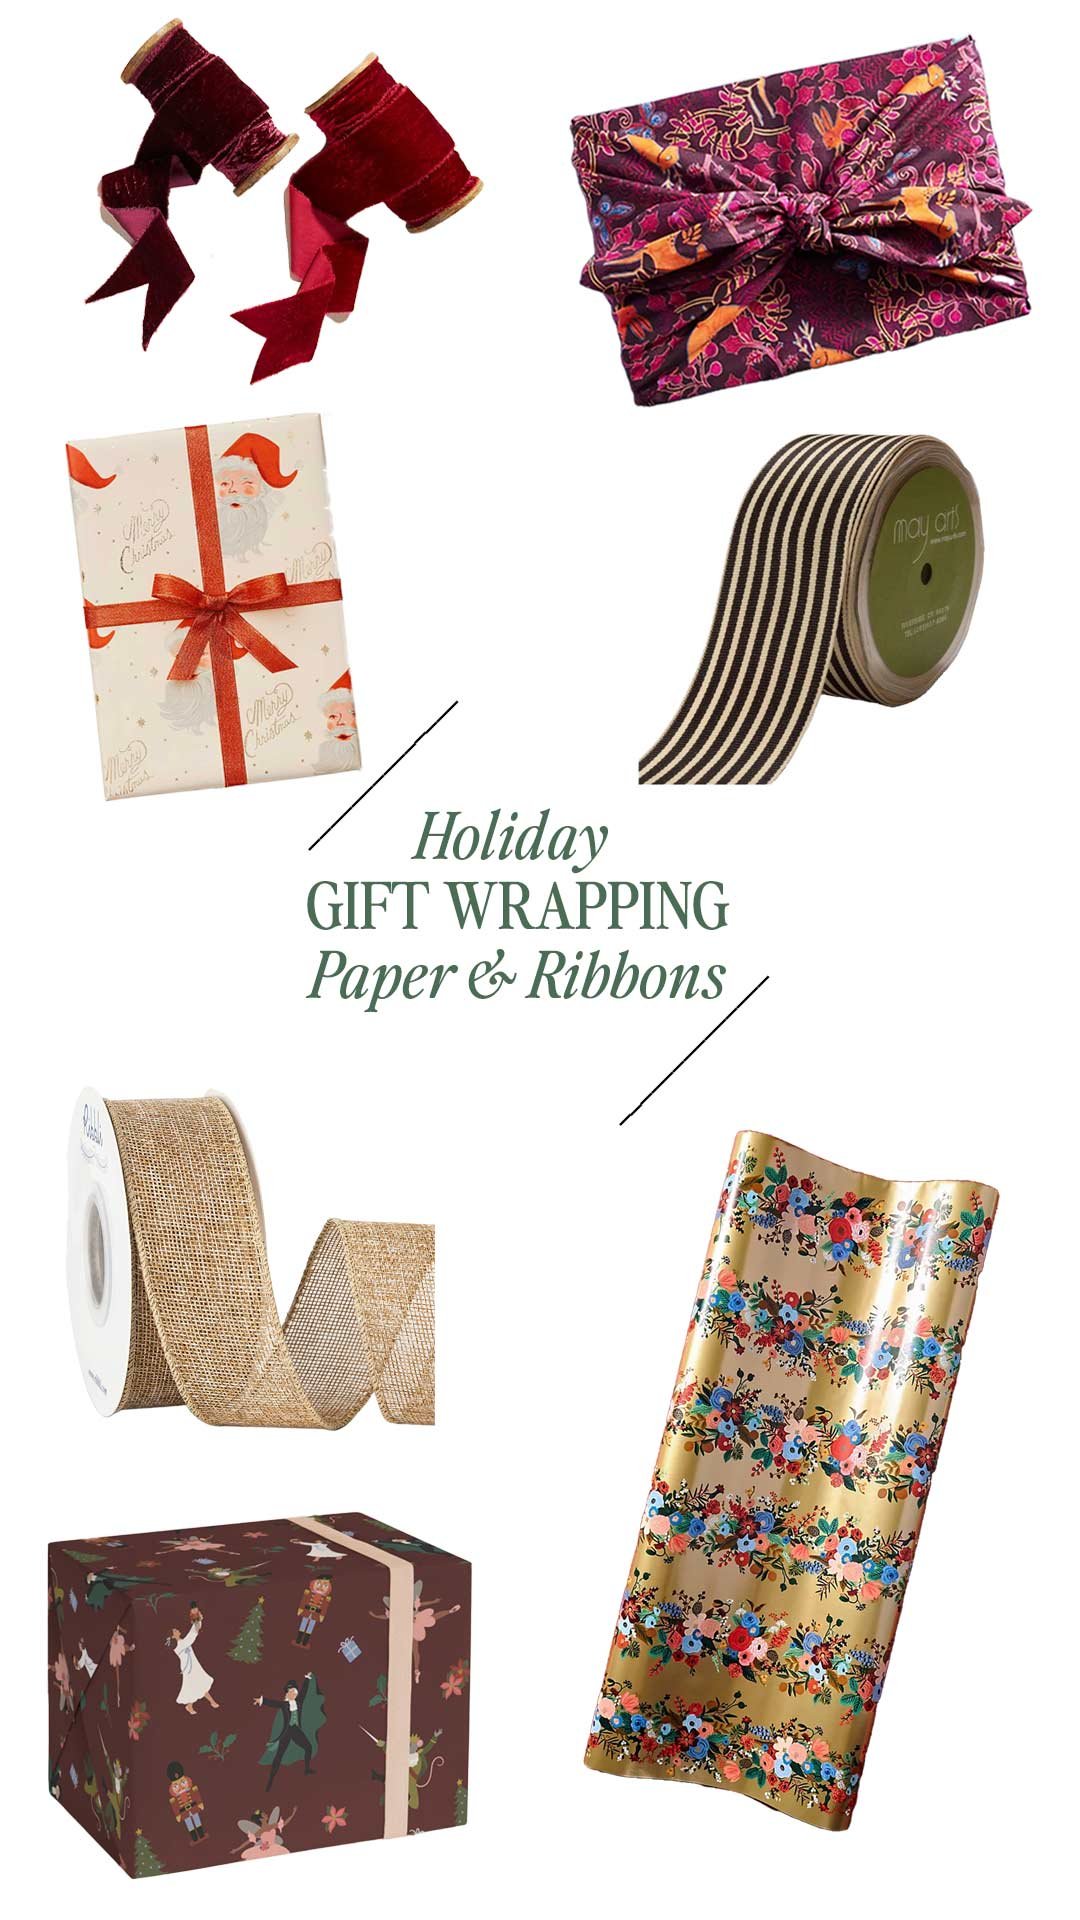 How to Create an Organized Wrapping Paper Zone - Sabrinas Organizing